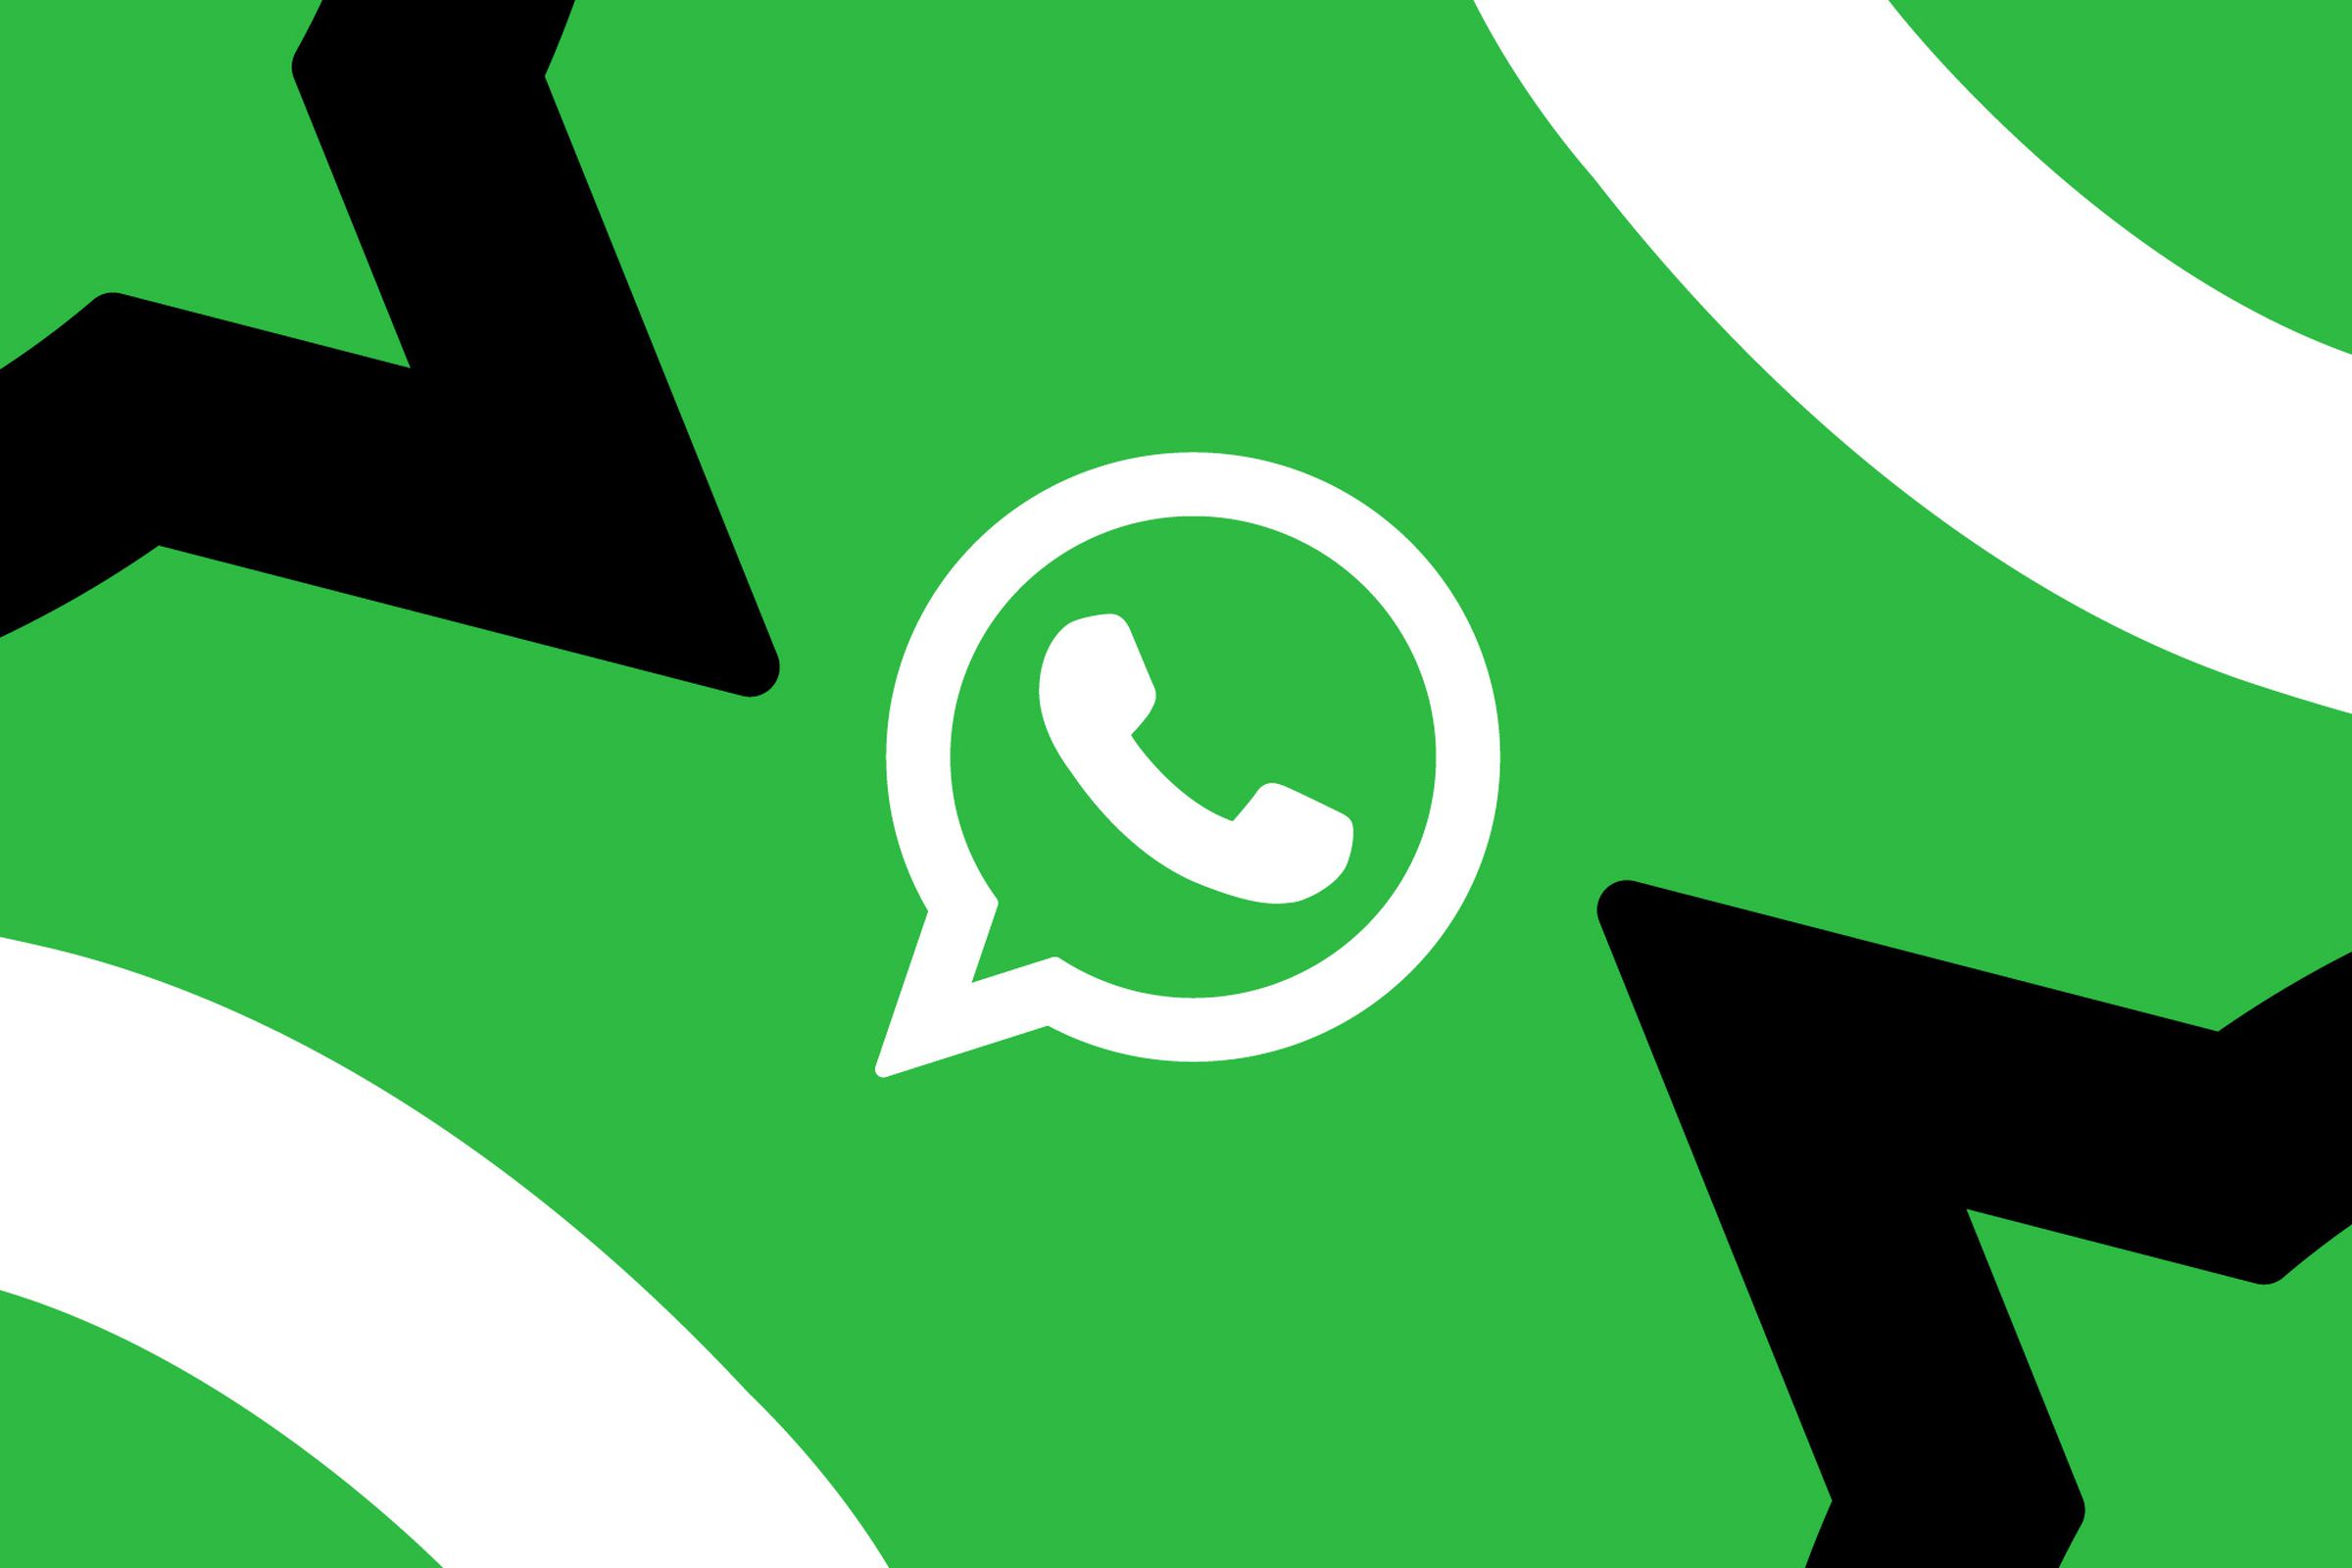 WhatsApp Channels turns on broadcasts for creators and organizations - The Verge